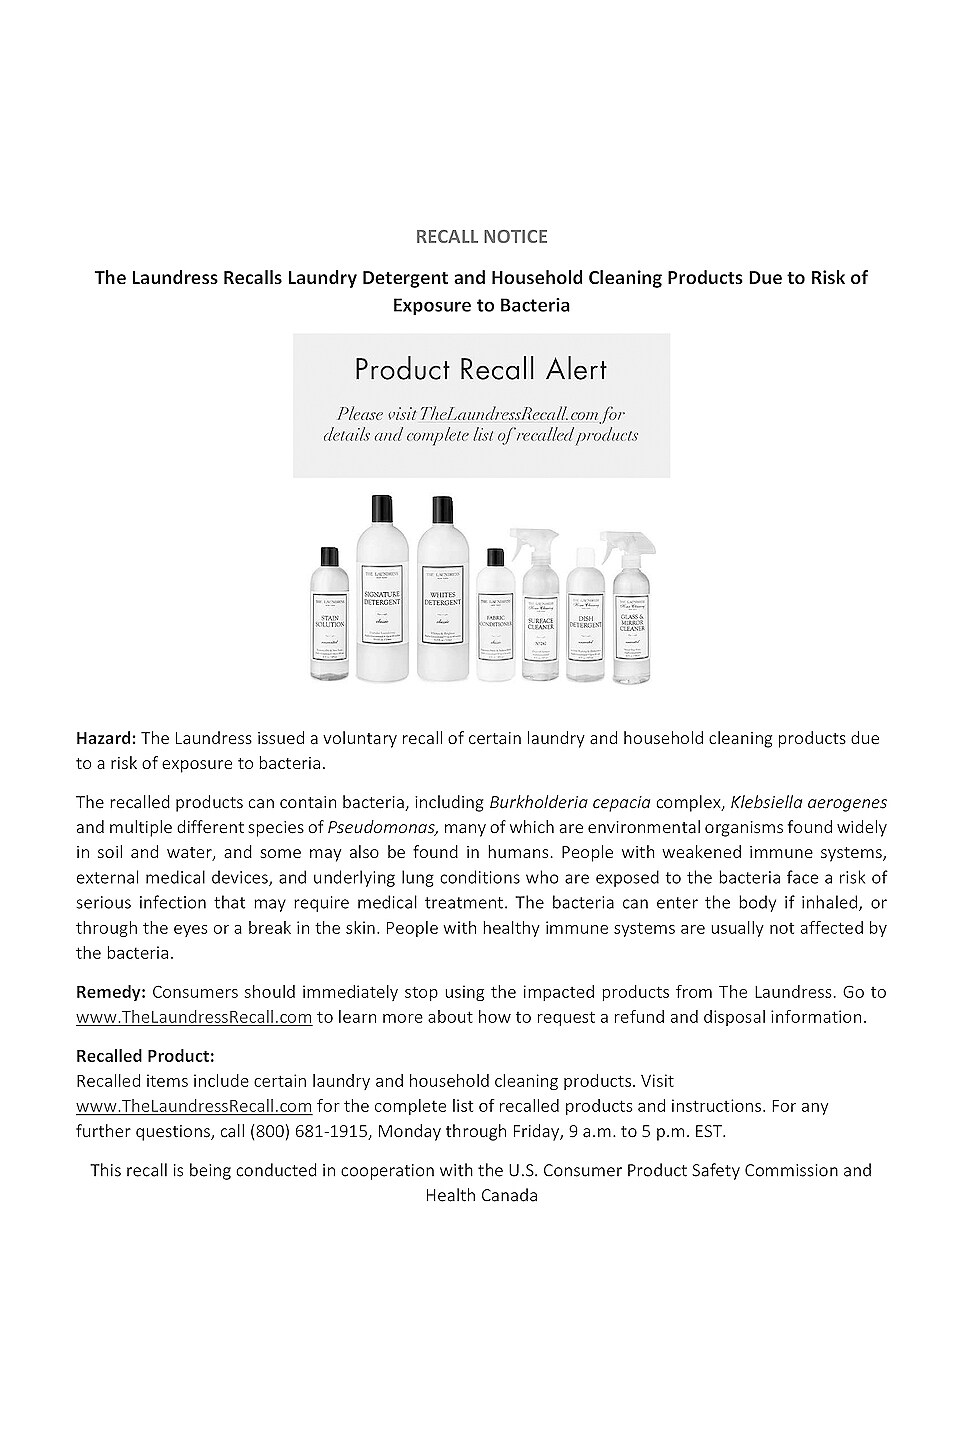 The Laundress Surface Cleaner Support Breath